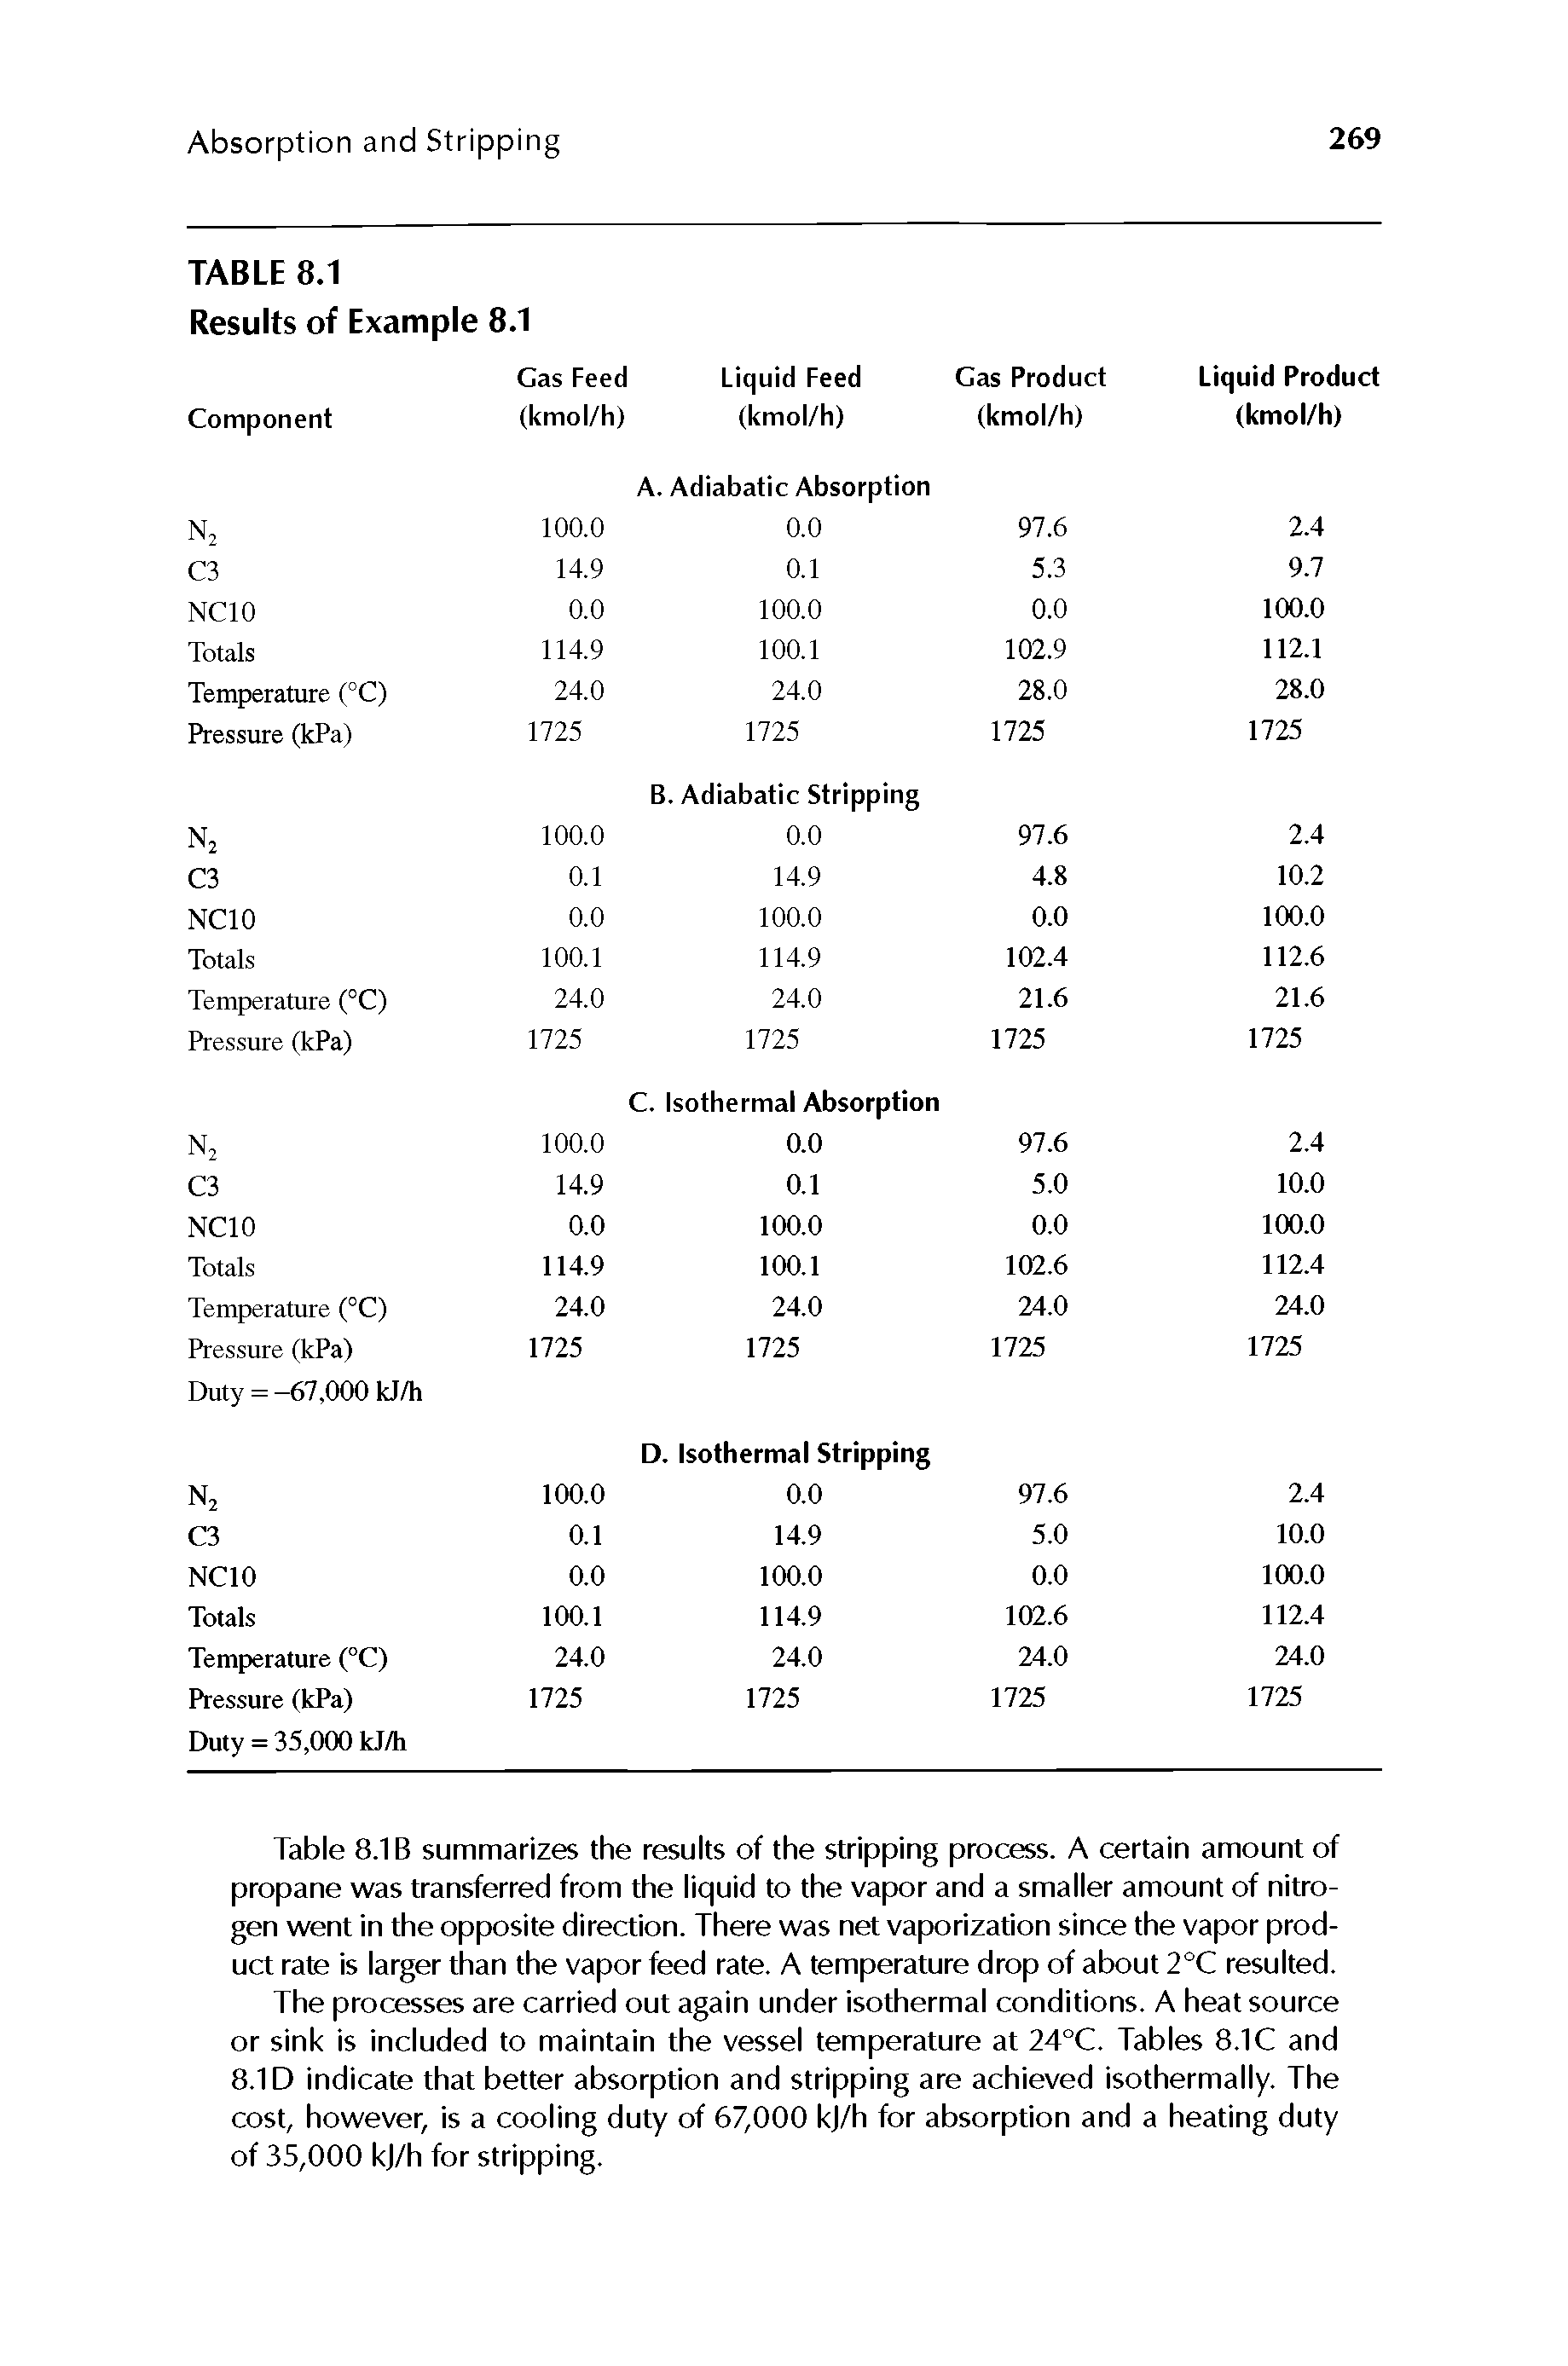 Table 8.1 B summarizes the results of the stripping process. A certain amount of propane was transferred from the liquid to the vapor and a smaller amount of nitrogen went in the opposite direction. There was net vaporization since the vapor product rate is larger than the vapor feed rate. A temperature drop of about 2°C resulted.